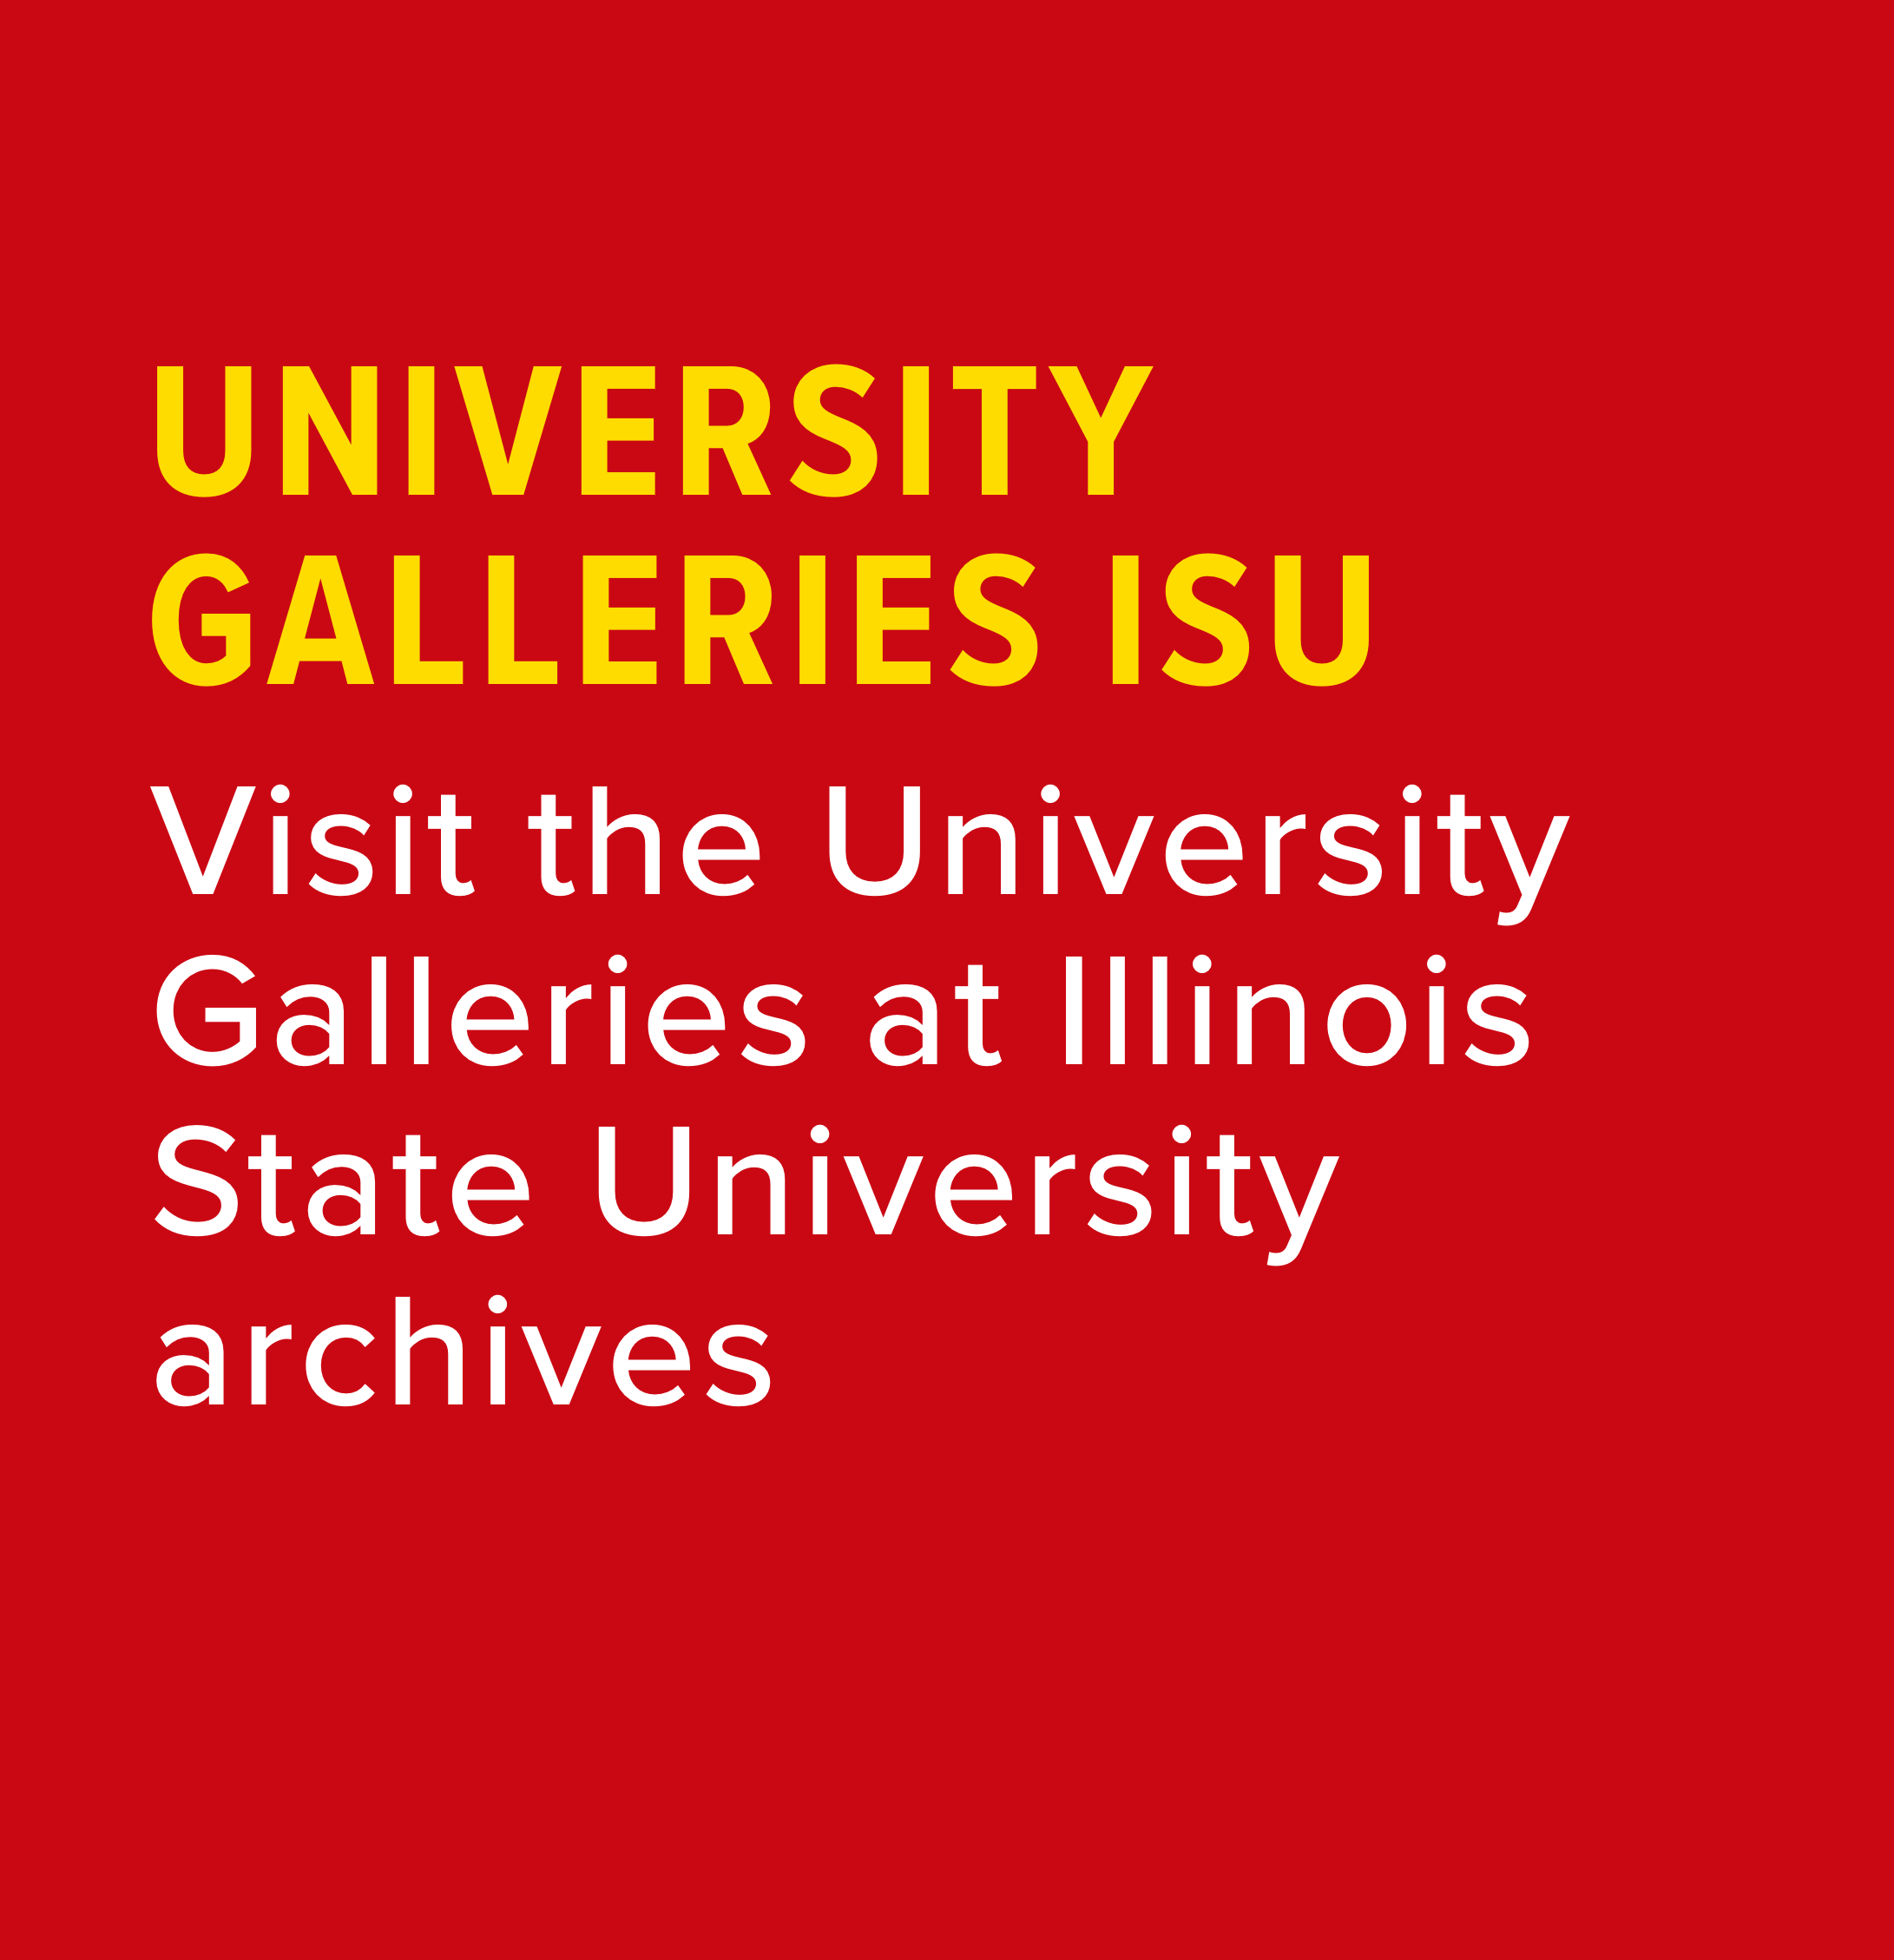 Visit the University Galleries at Illinois State University archives